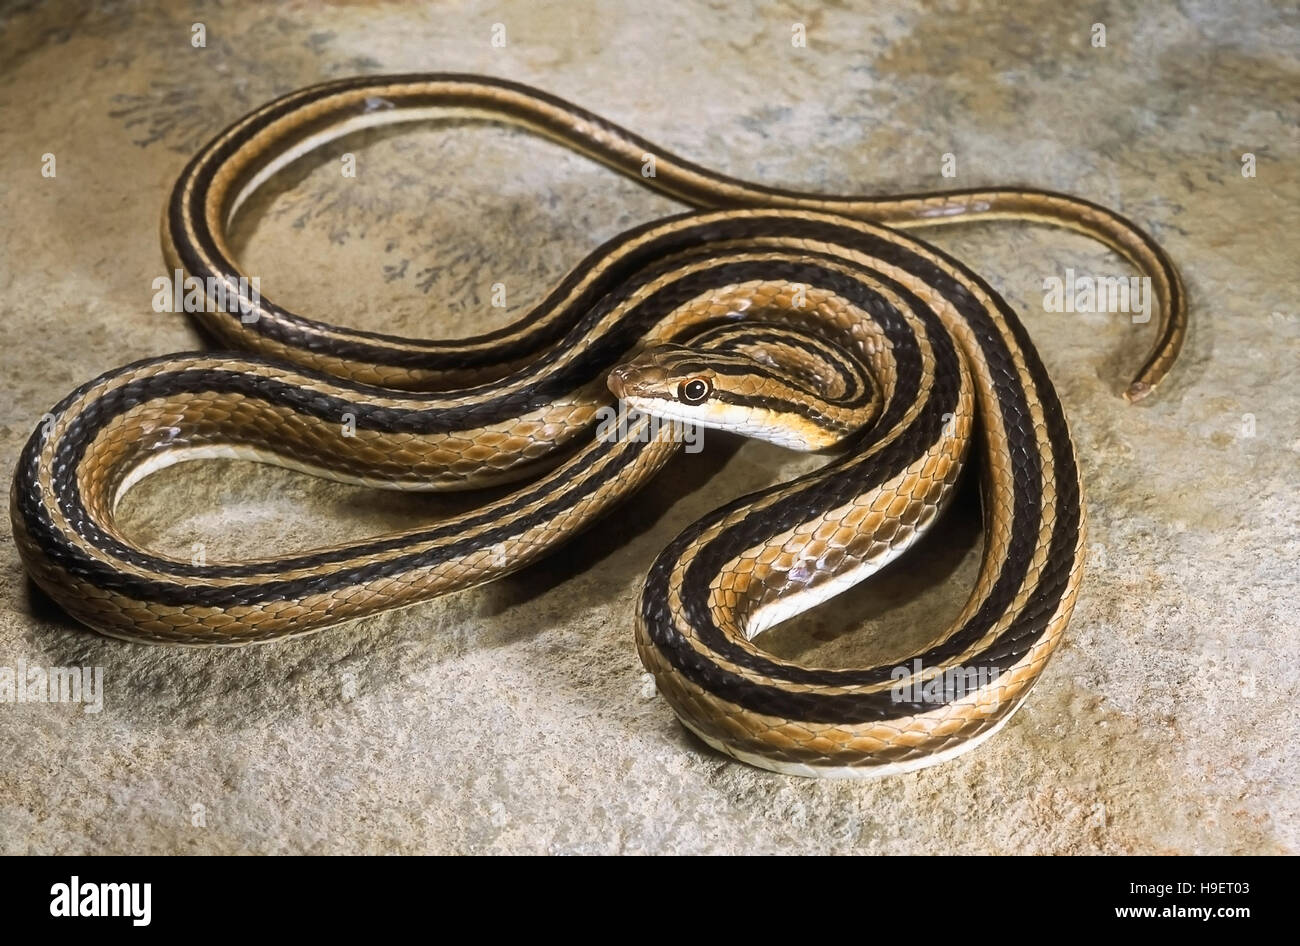 LEITH'S SAND SNAKE Psammophis leithii from Ahmedabad, Gujarat, India. Entire body - coiled. Stock Photo